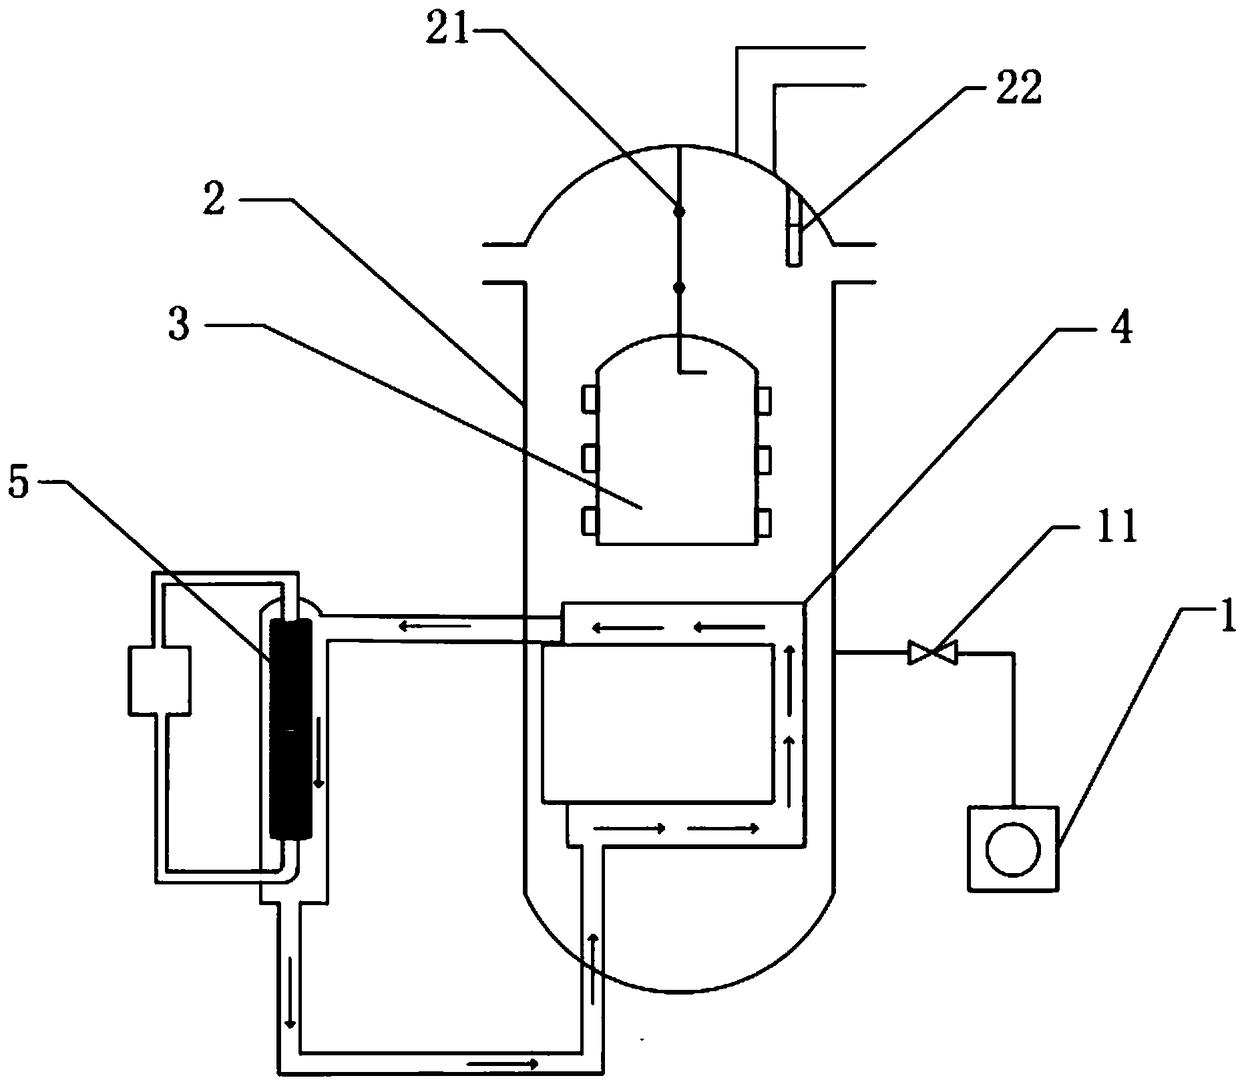 Rapid setting furnace with vertical low resistance cooling system